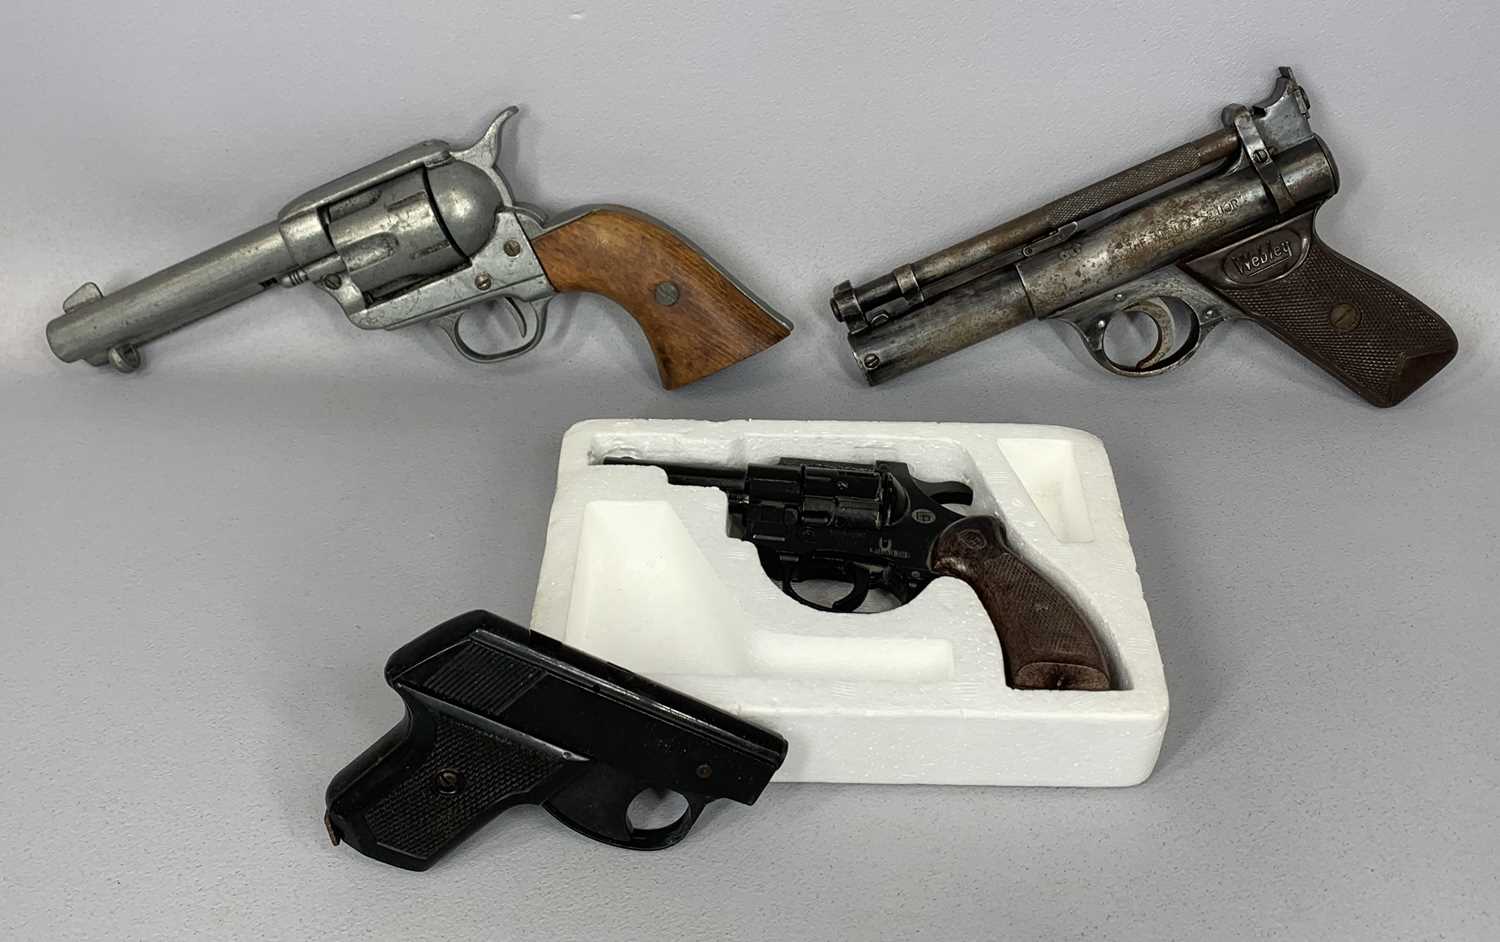 MIXED GROUP OF PISTOLS, including a Webley Senior Point 177 air pistol, Sussex Armoury Official